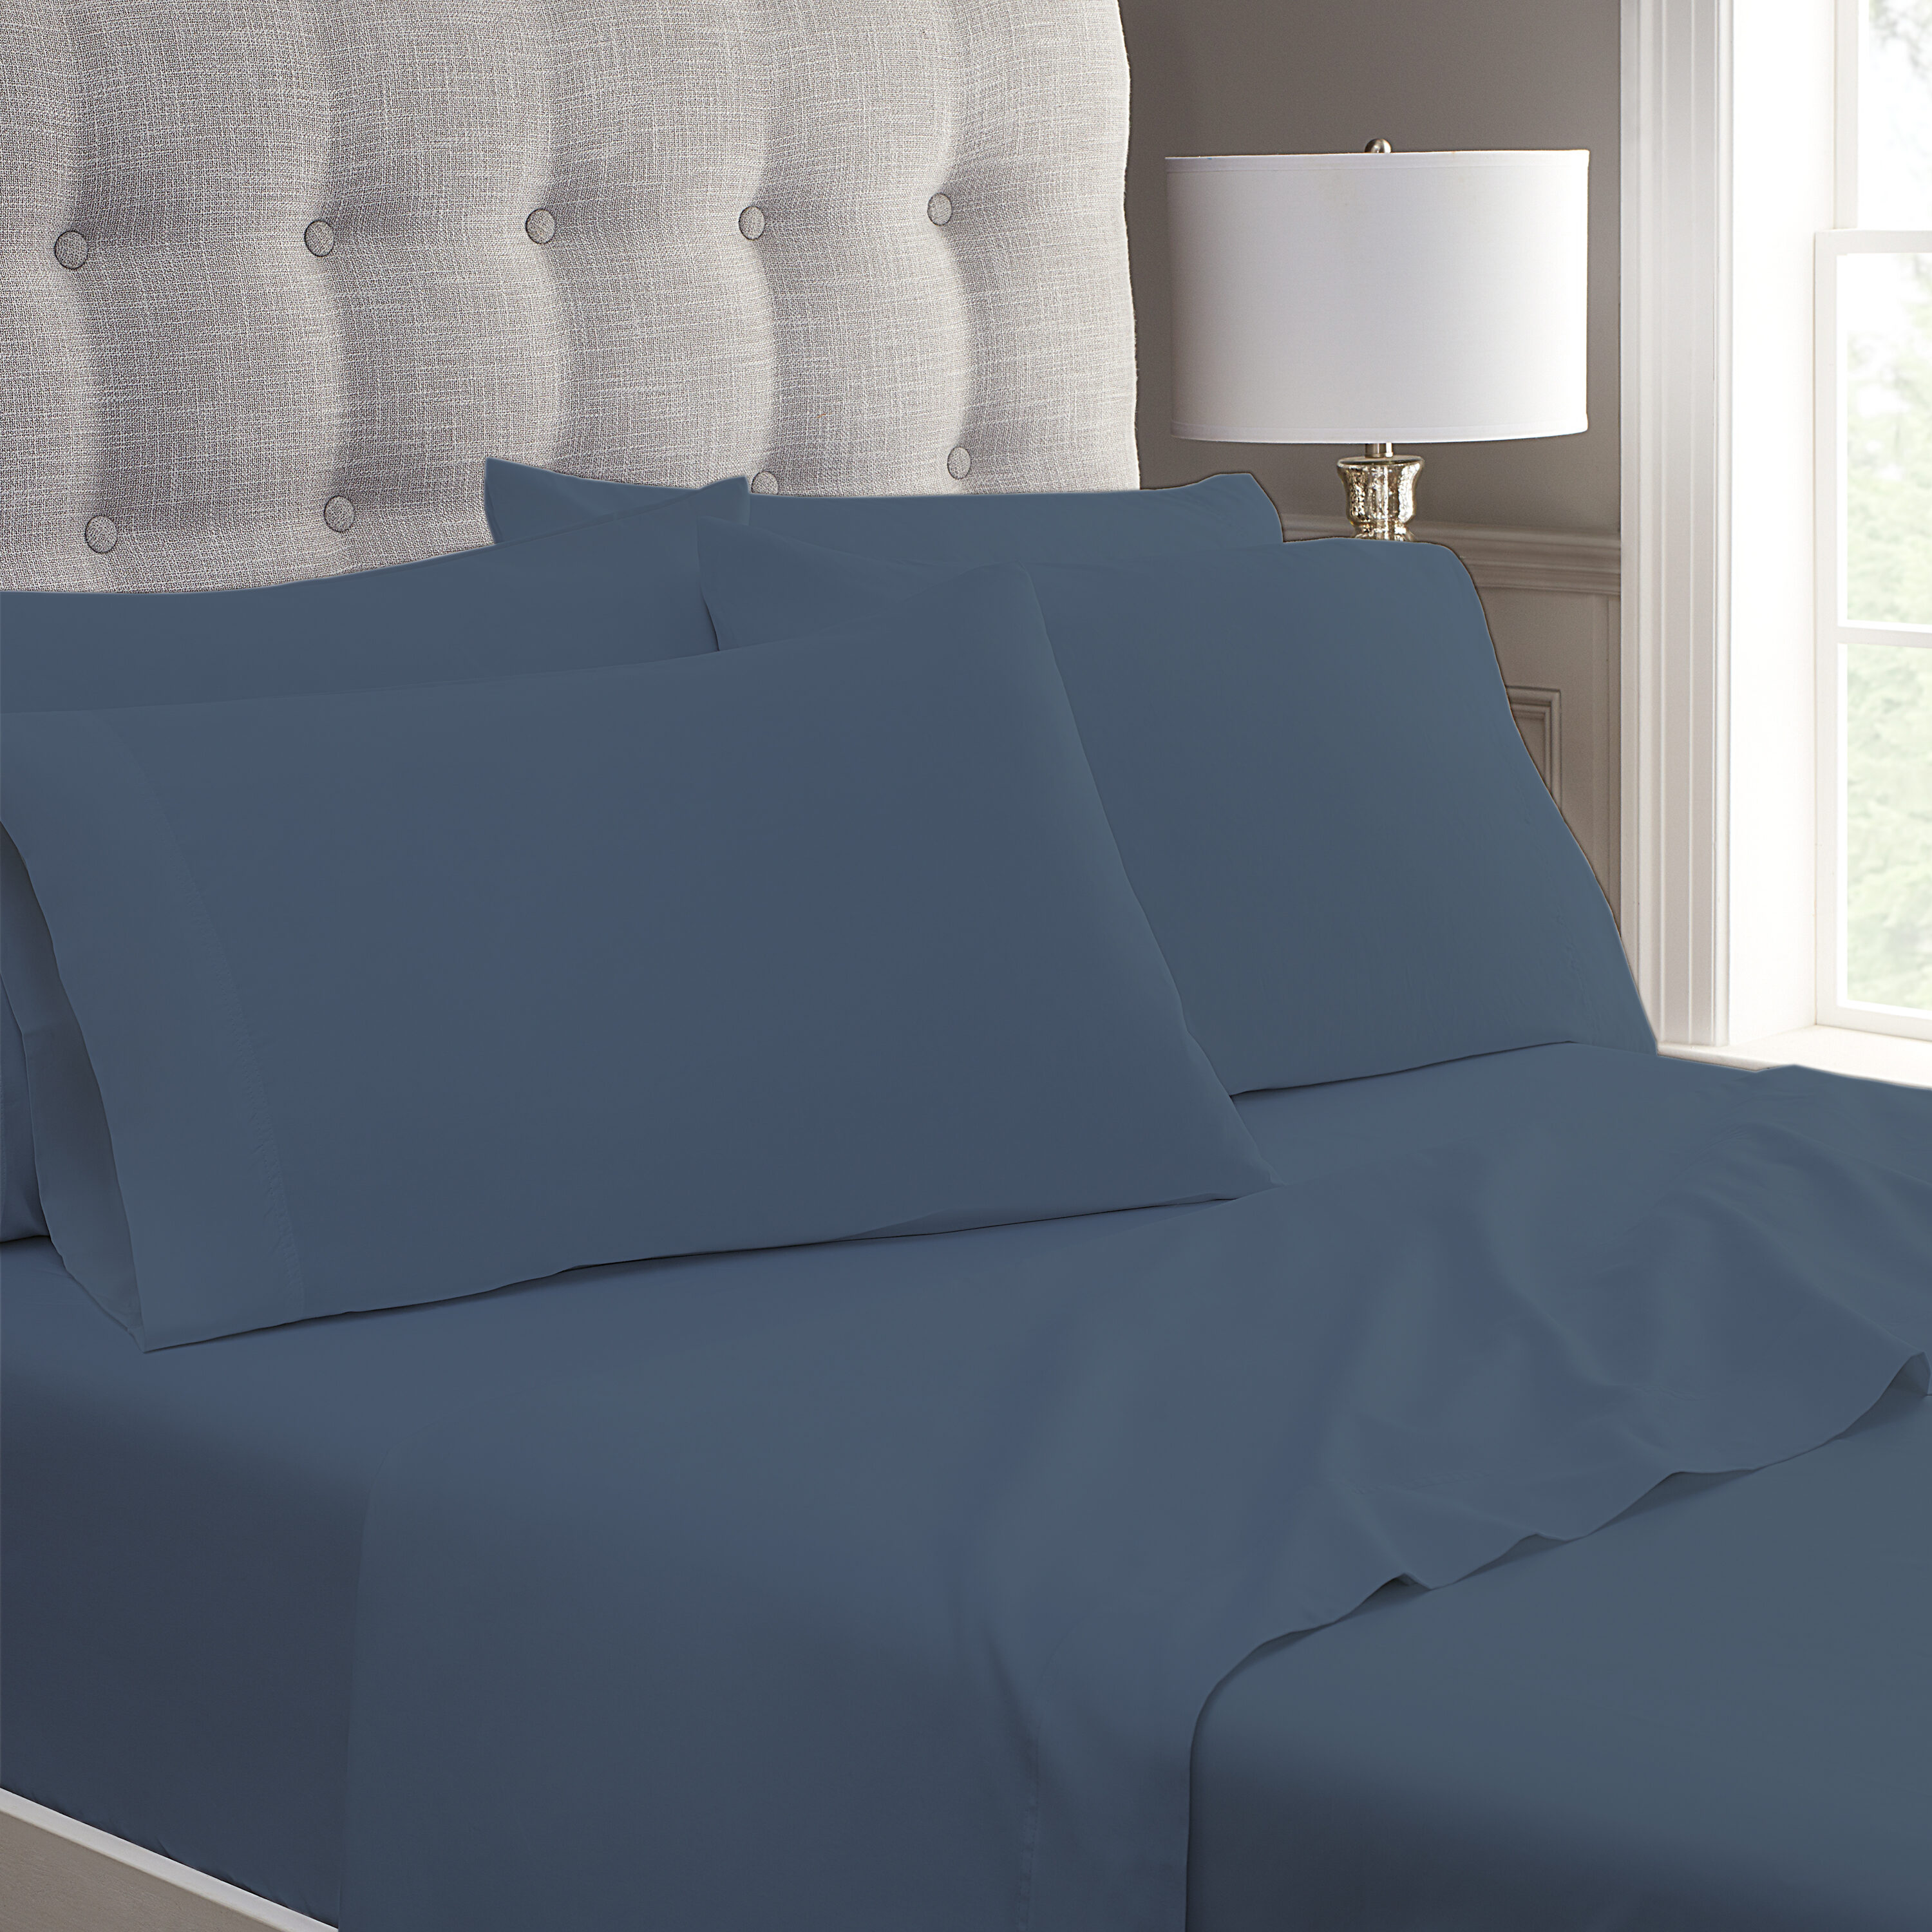 Fab Glass and Mirror Bedsheet Queen 300-Thread-Count Cotton Sky Blue Bed-Sheet | DY32-QSAVF